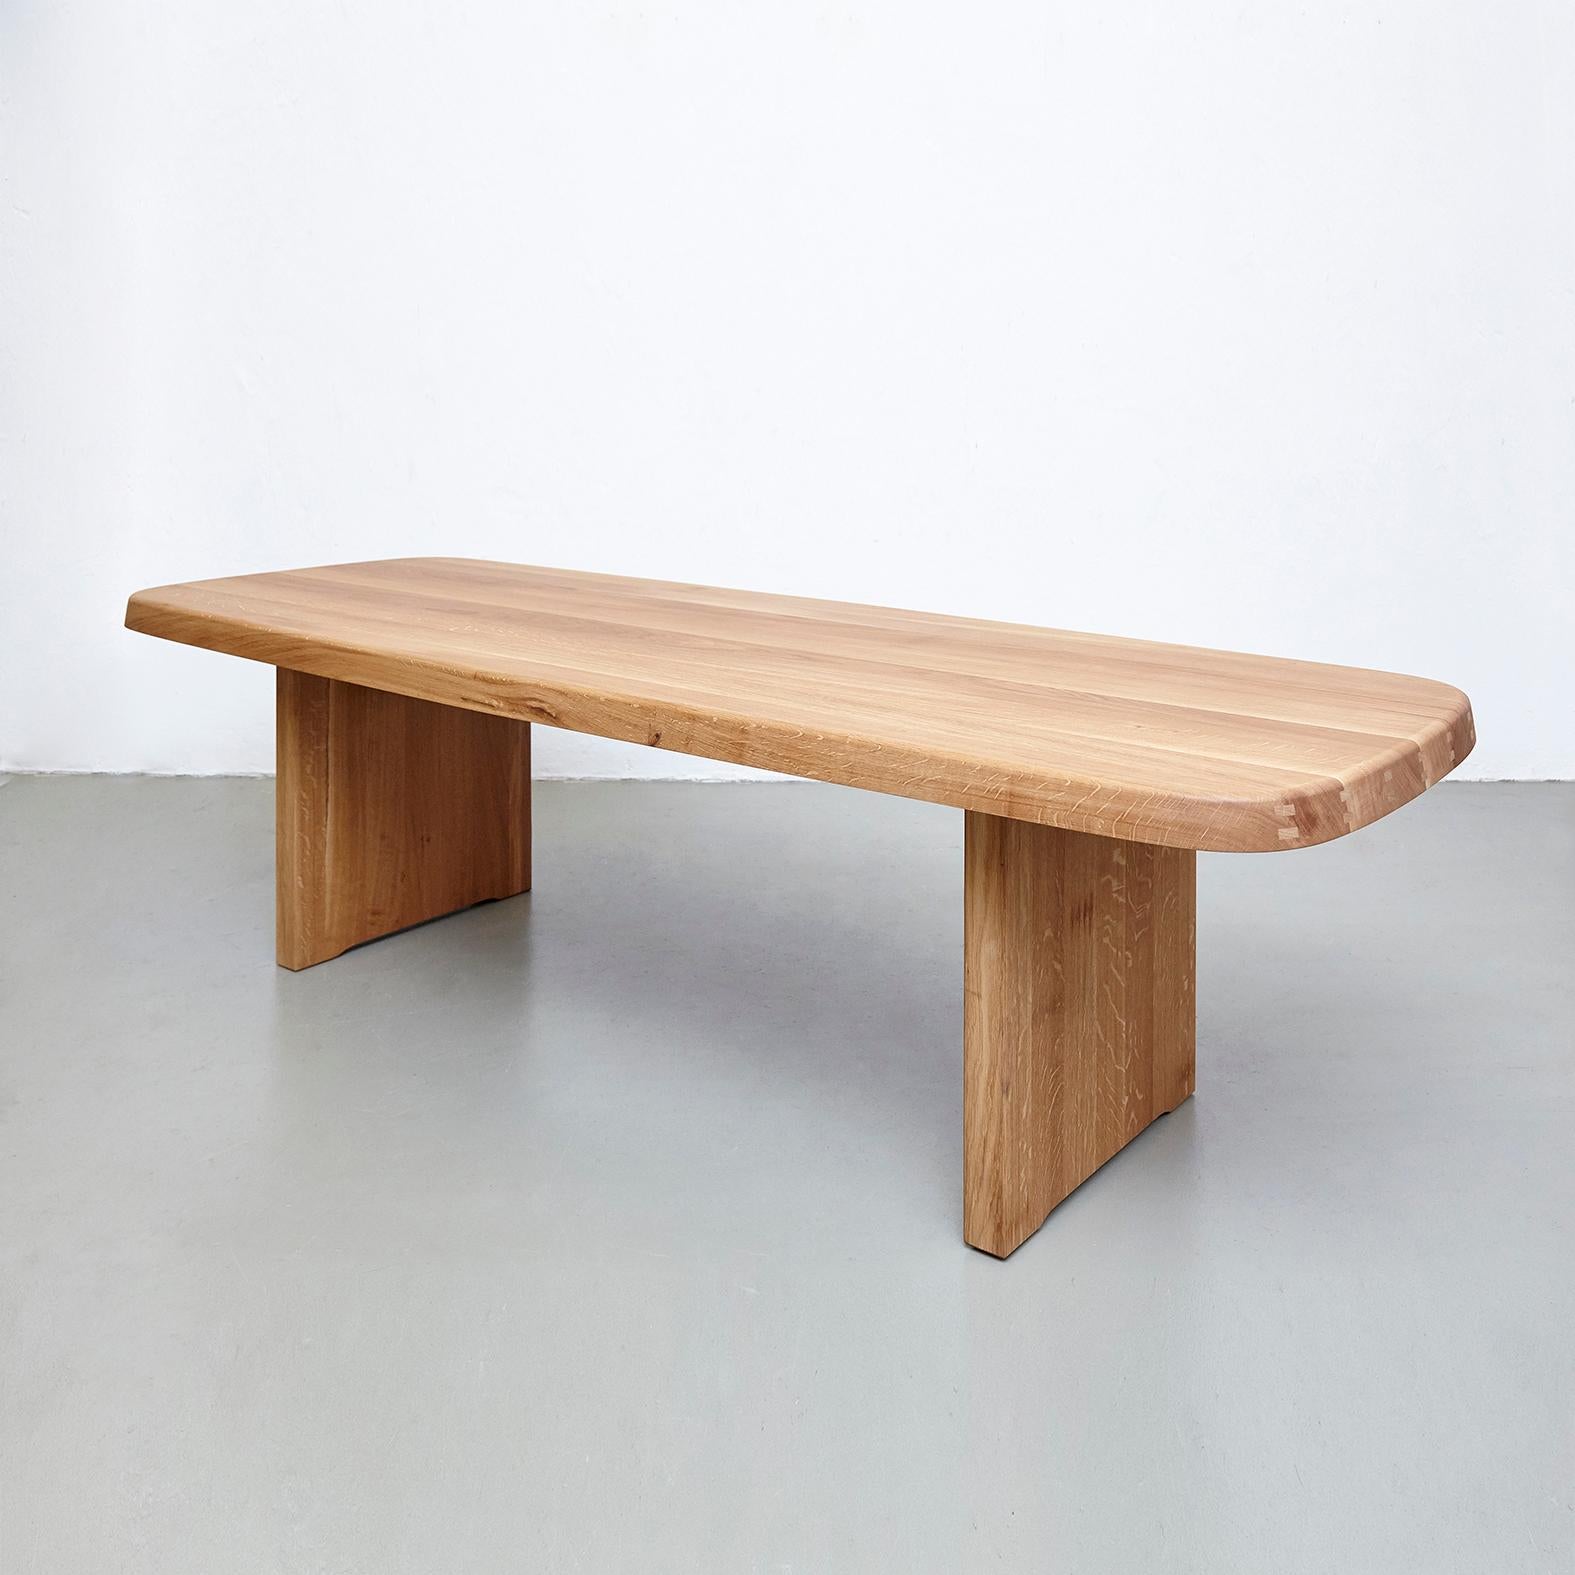 T20A dining table designed by Pierre Chapo.
Manufactured by Chapo Creation (France), 2019.
Solid oakwood.

Dimensions dining table: 74 cm H x 260 cm W x 96 cm D.

In original condition, with minor wear consistent with age and use, preserving a